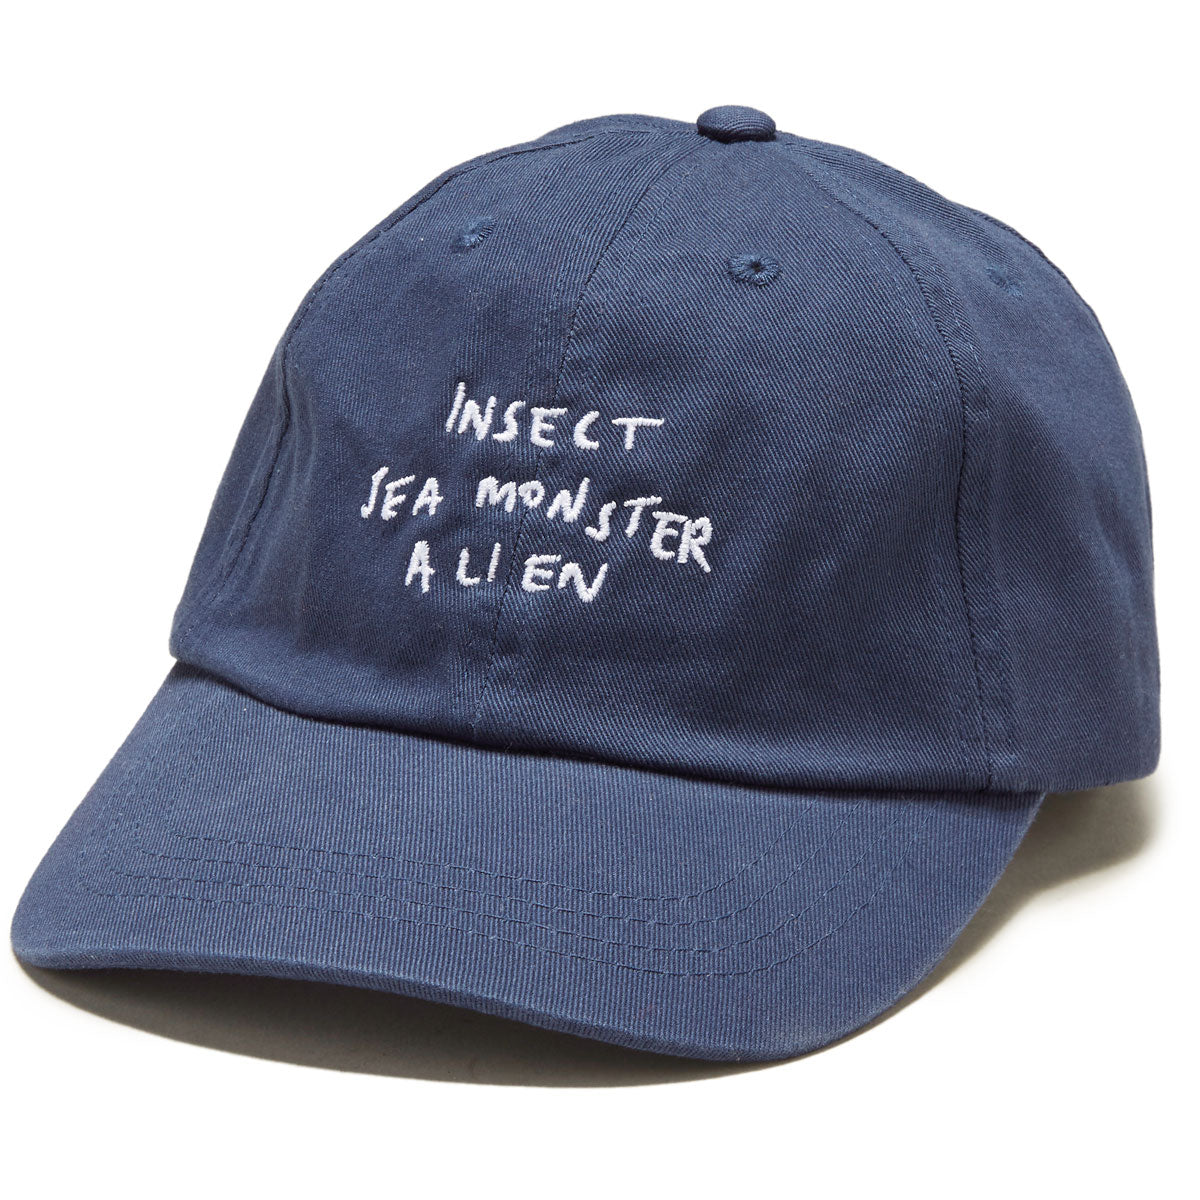 Sour Solution Sci-Fi Hat - Navy image 1